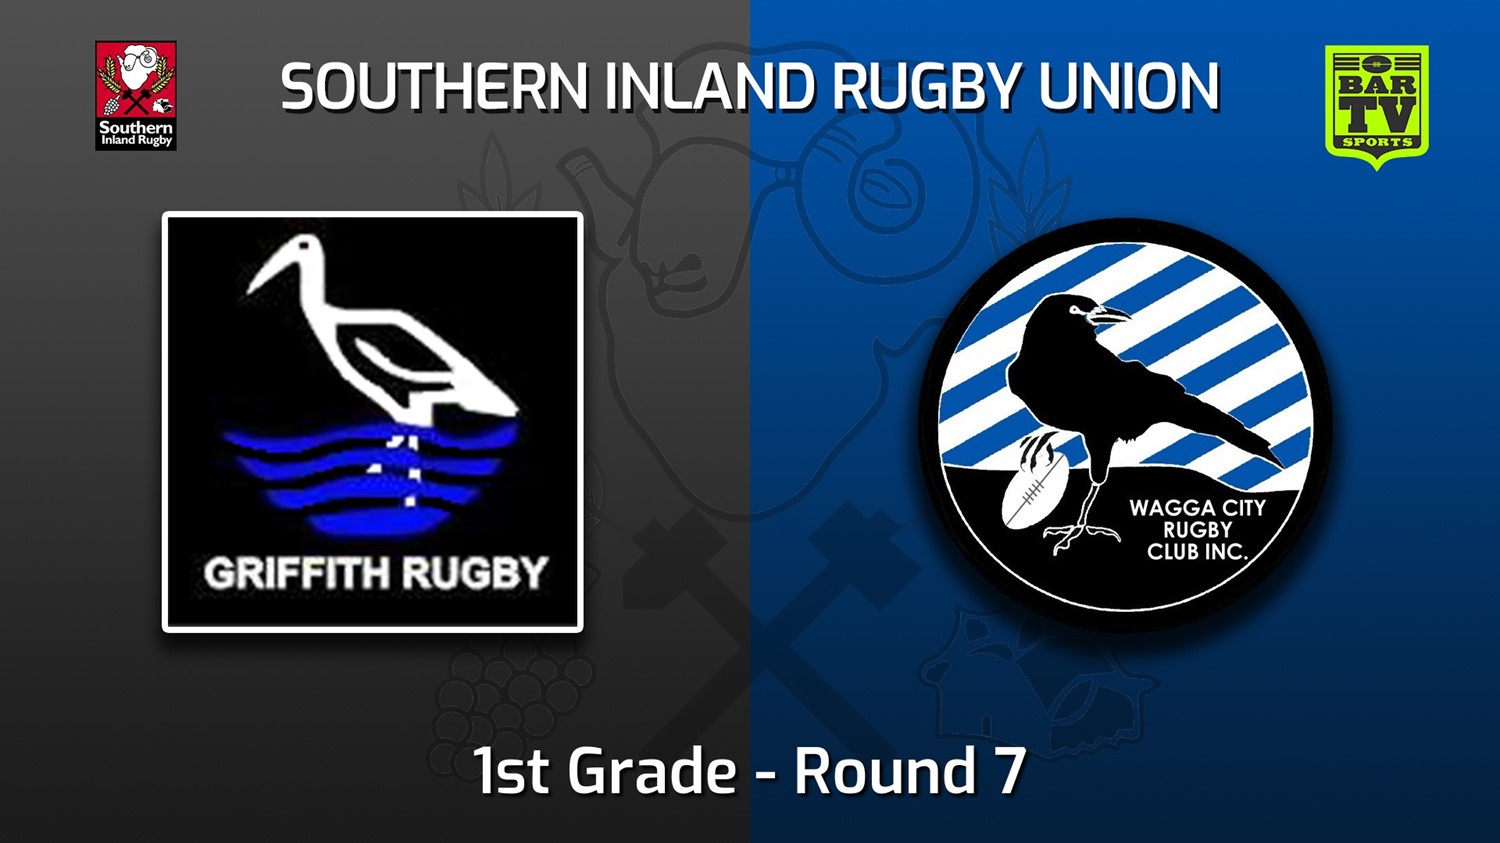 220521-Southern Inland Rugby Union Round 7 - 1st Grade - Griffith v Wagga City Slate Image